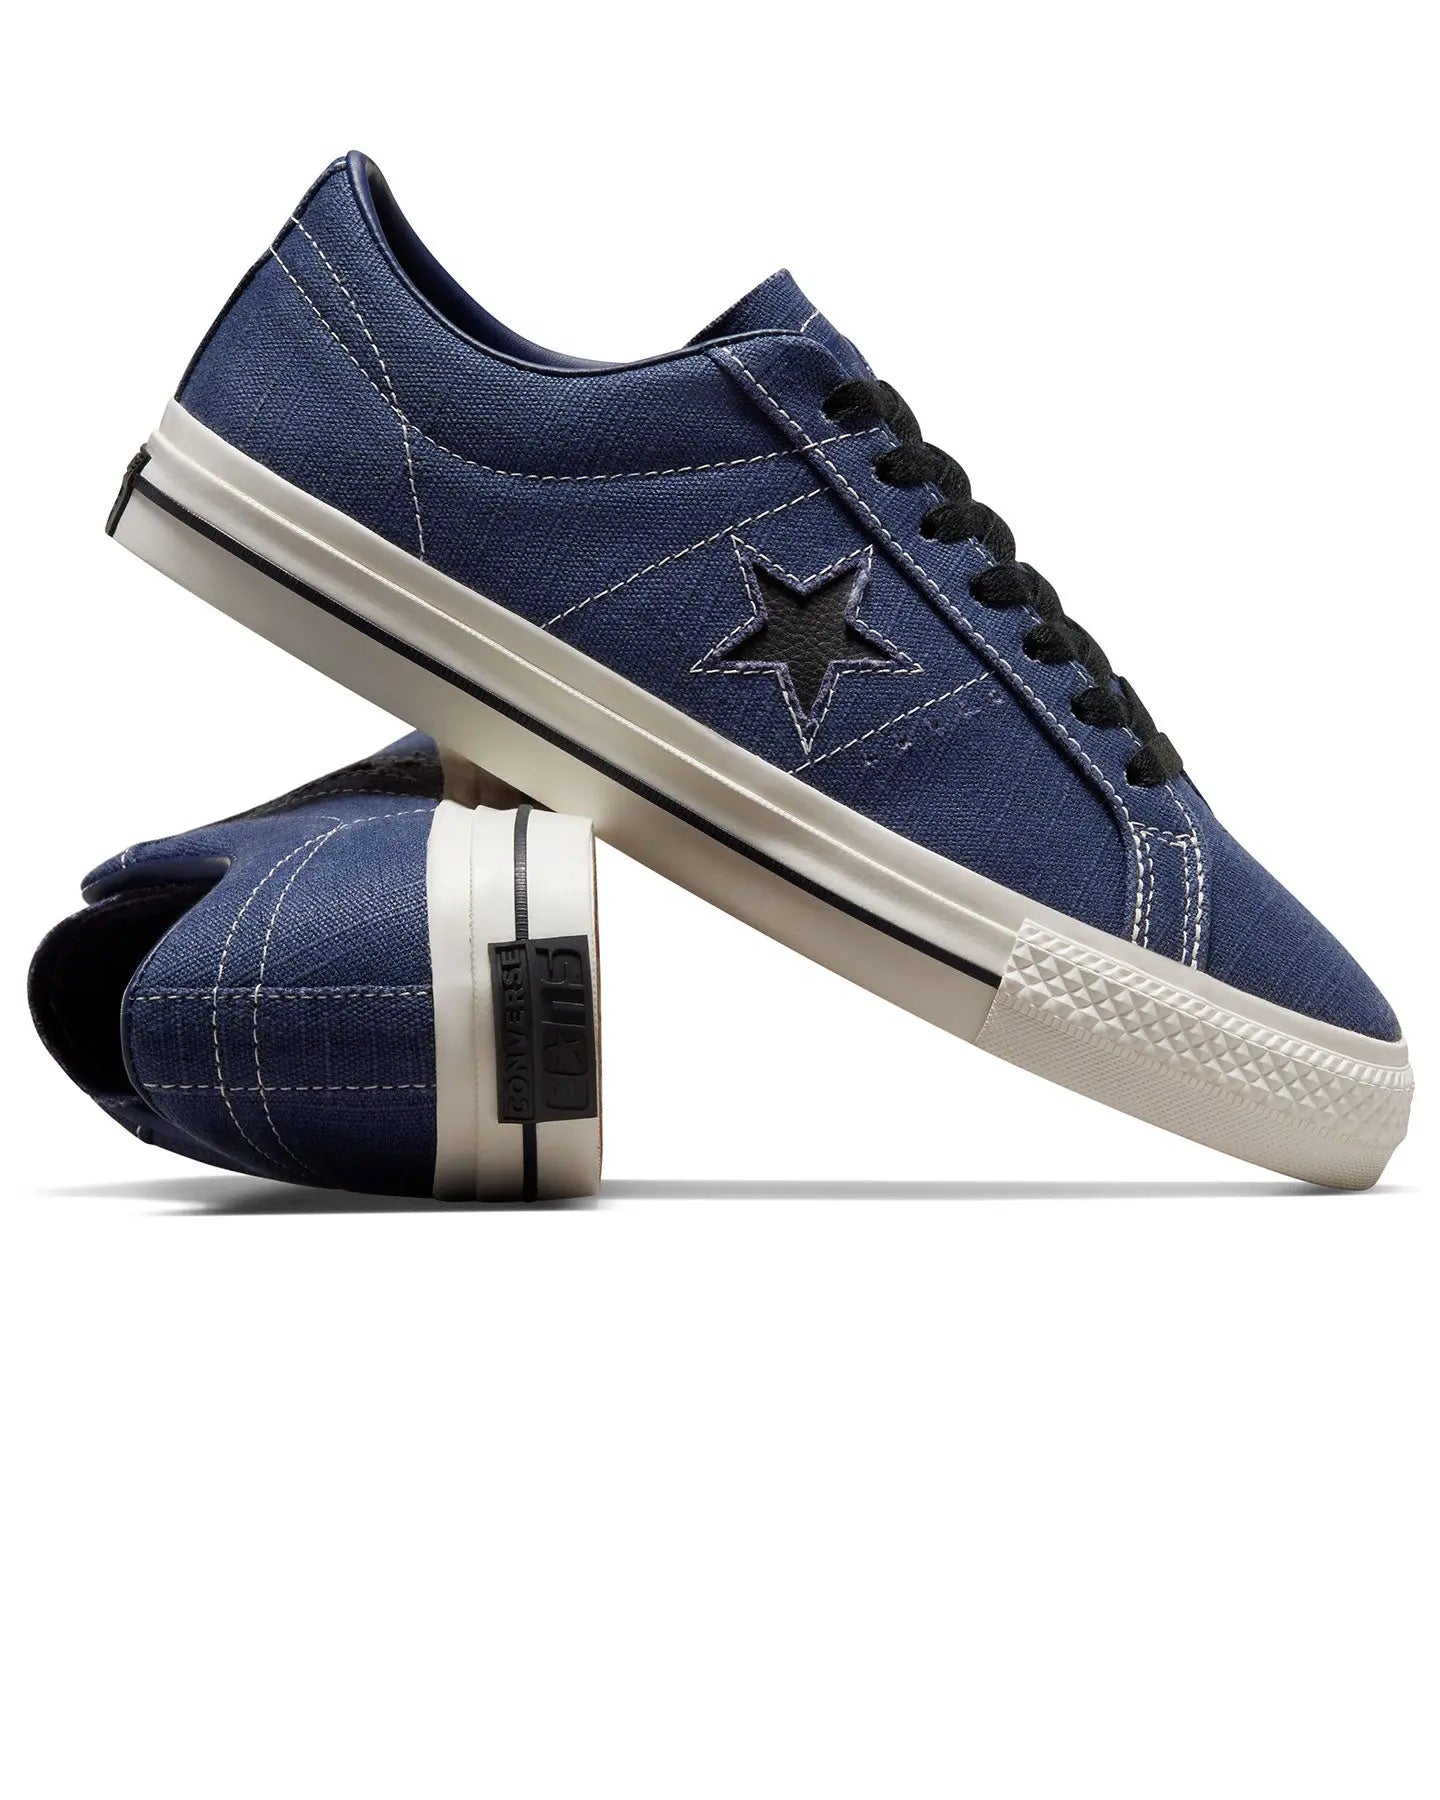 Cons One Star Pro - Uncharted Waters Blue / Egret / Black Footwear